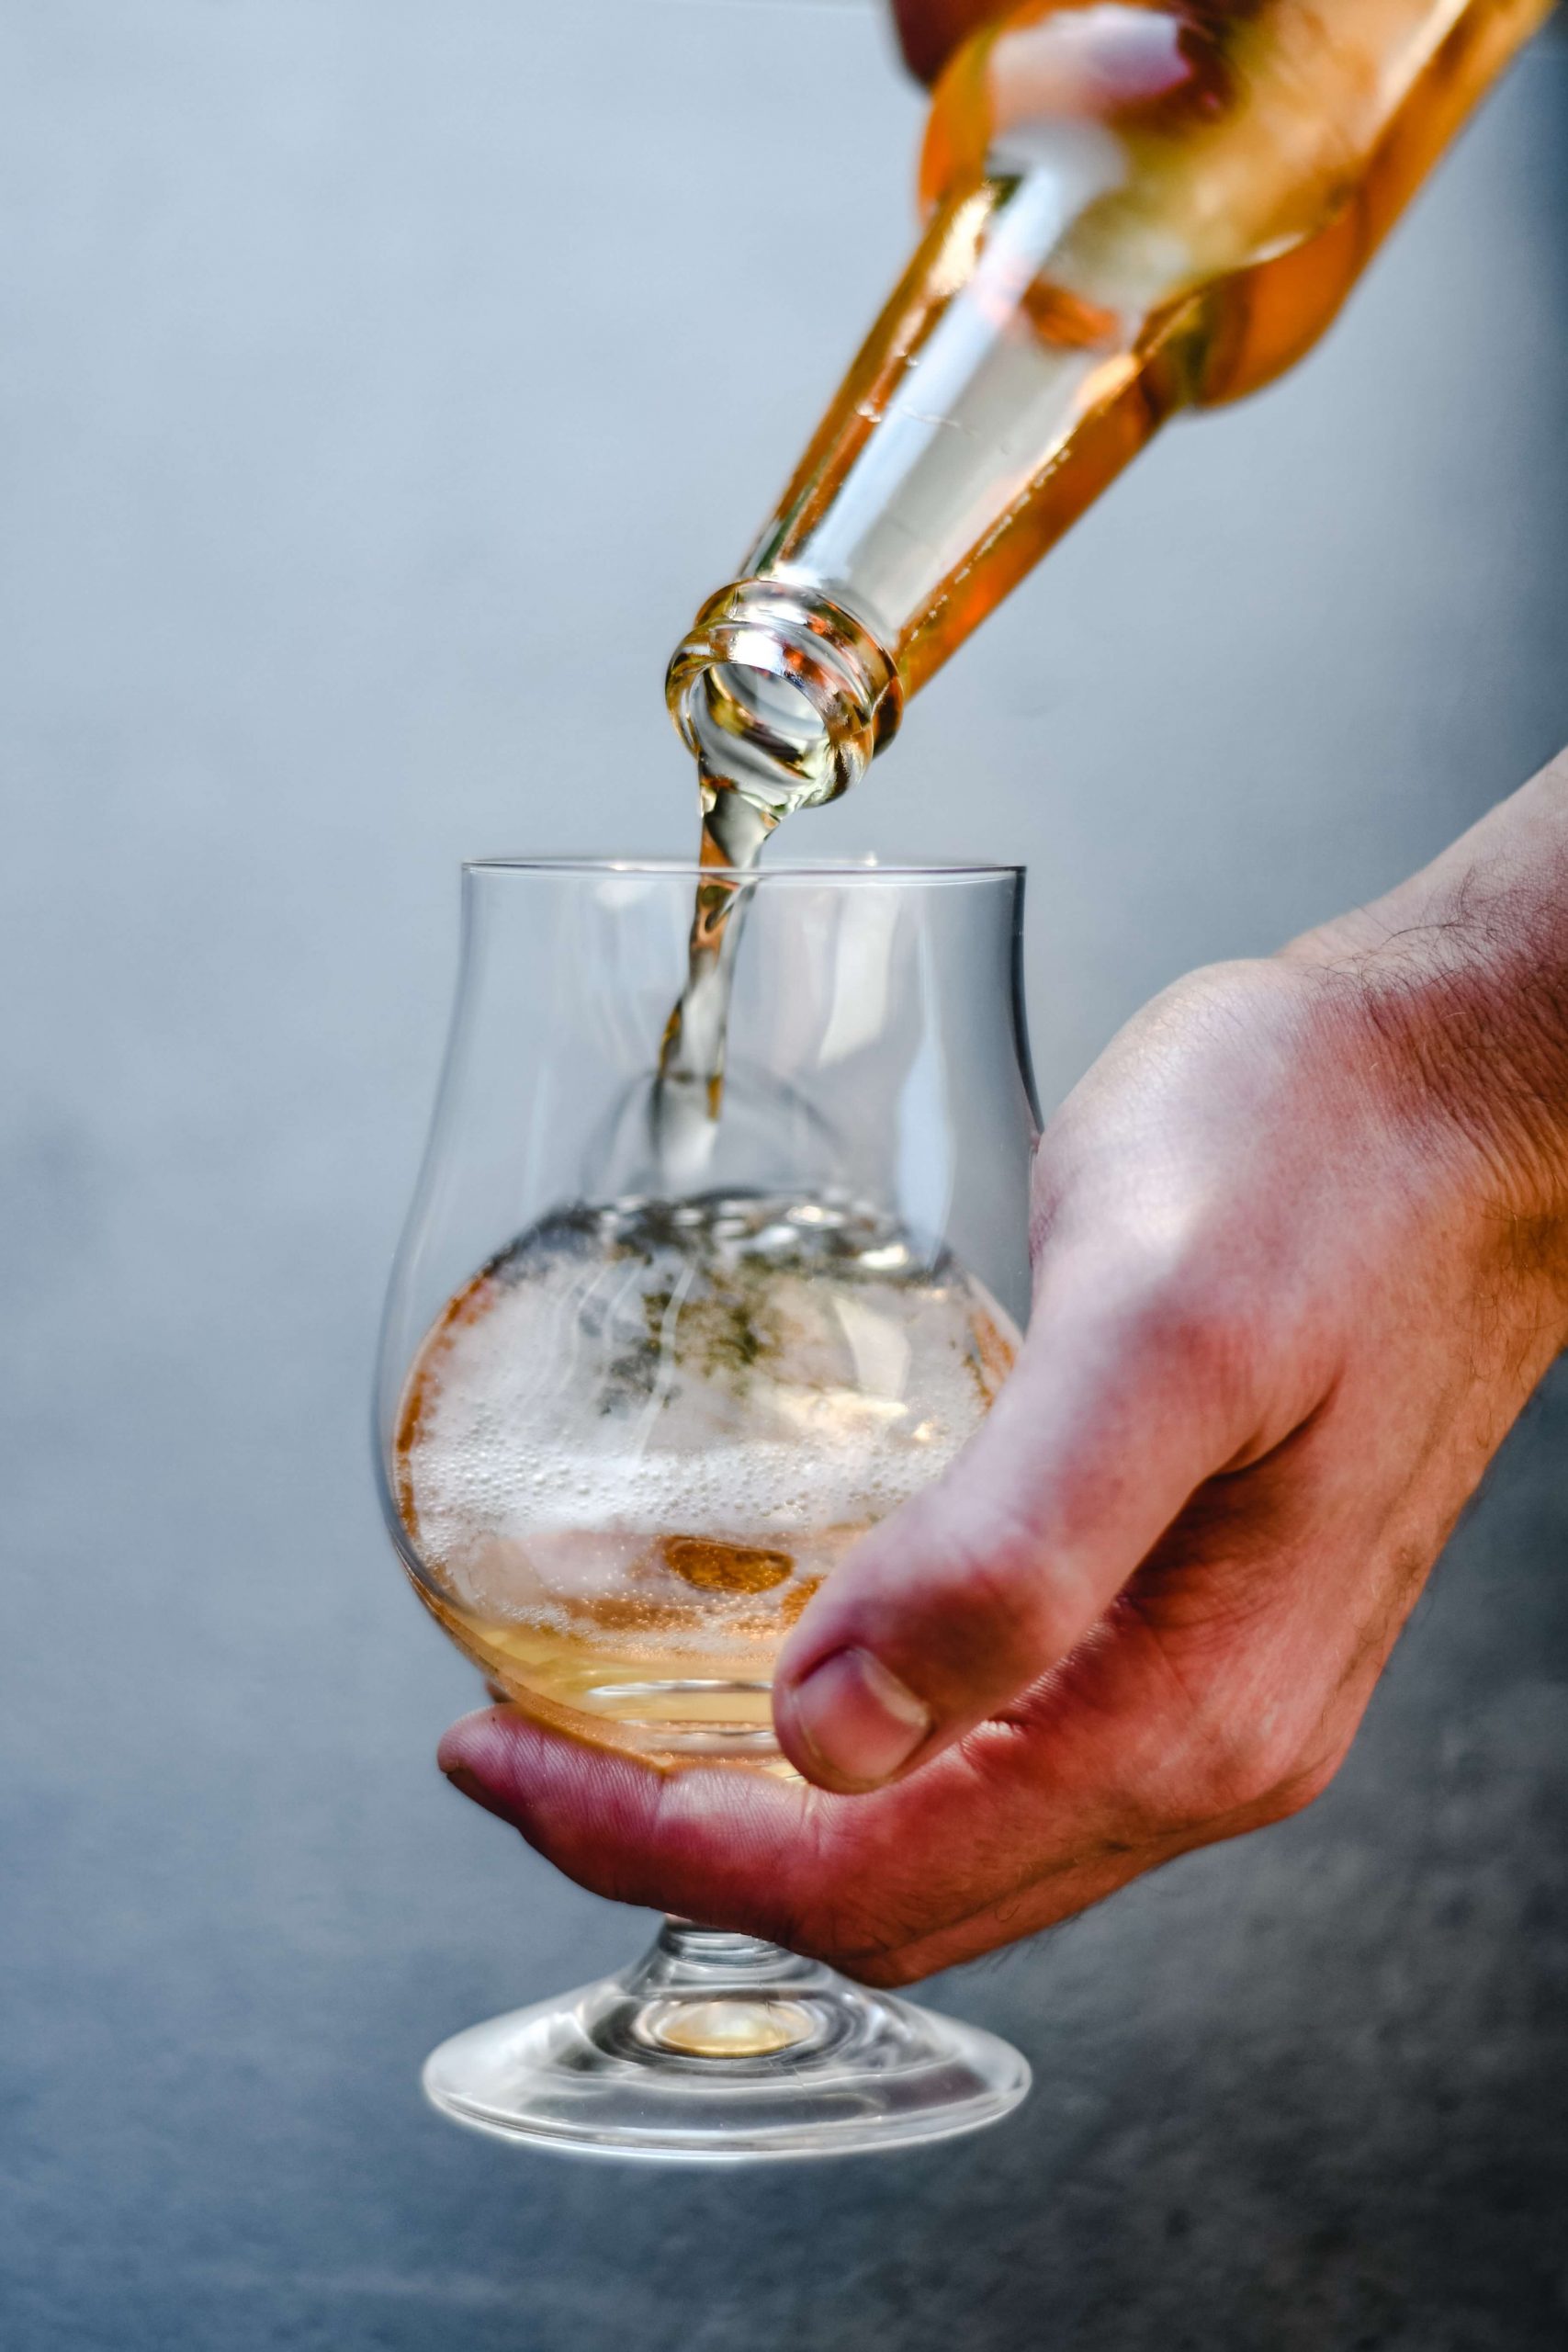 A person pouring a bottle of whiskey into a glass.